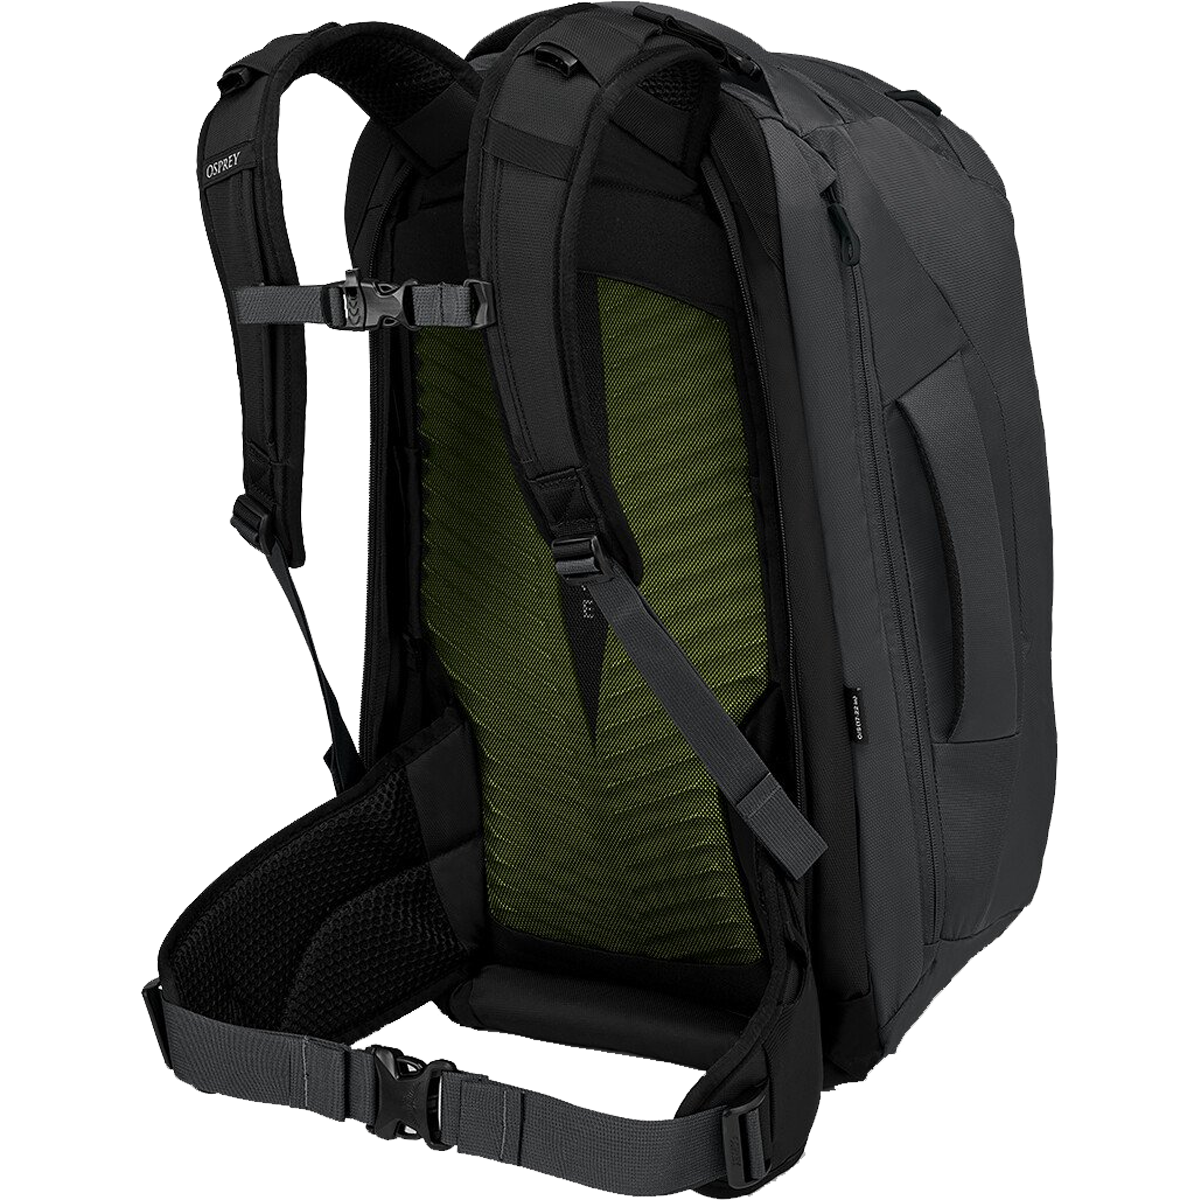  Osprey Farpoint 40 Travel Backpack, Multi : Sports & Outdoors